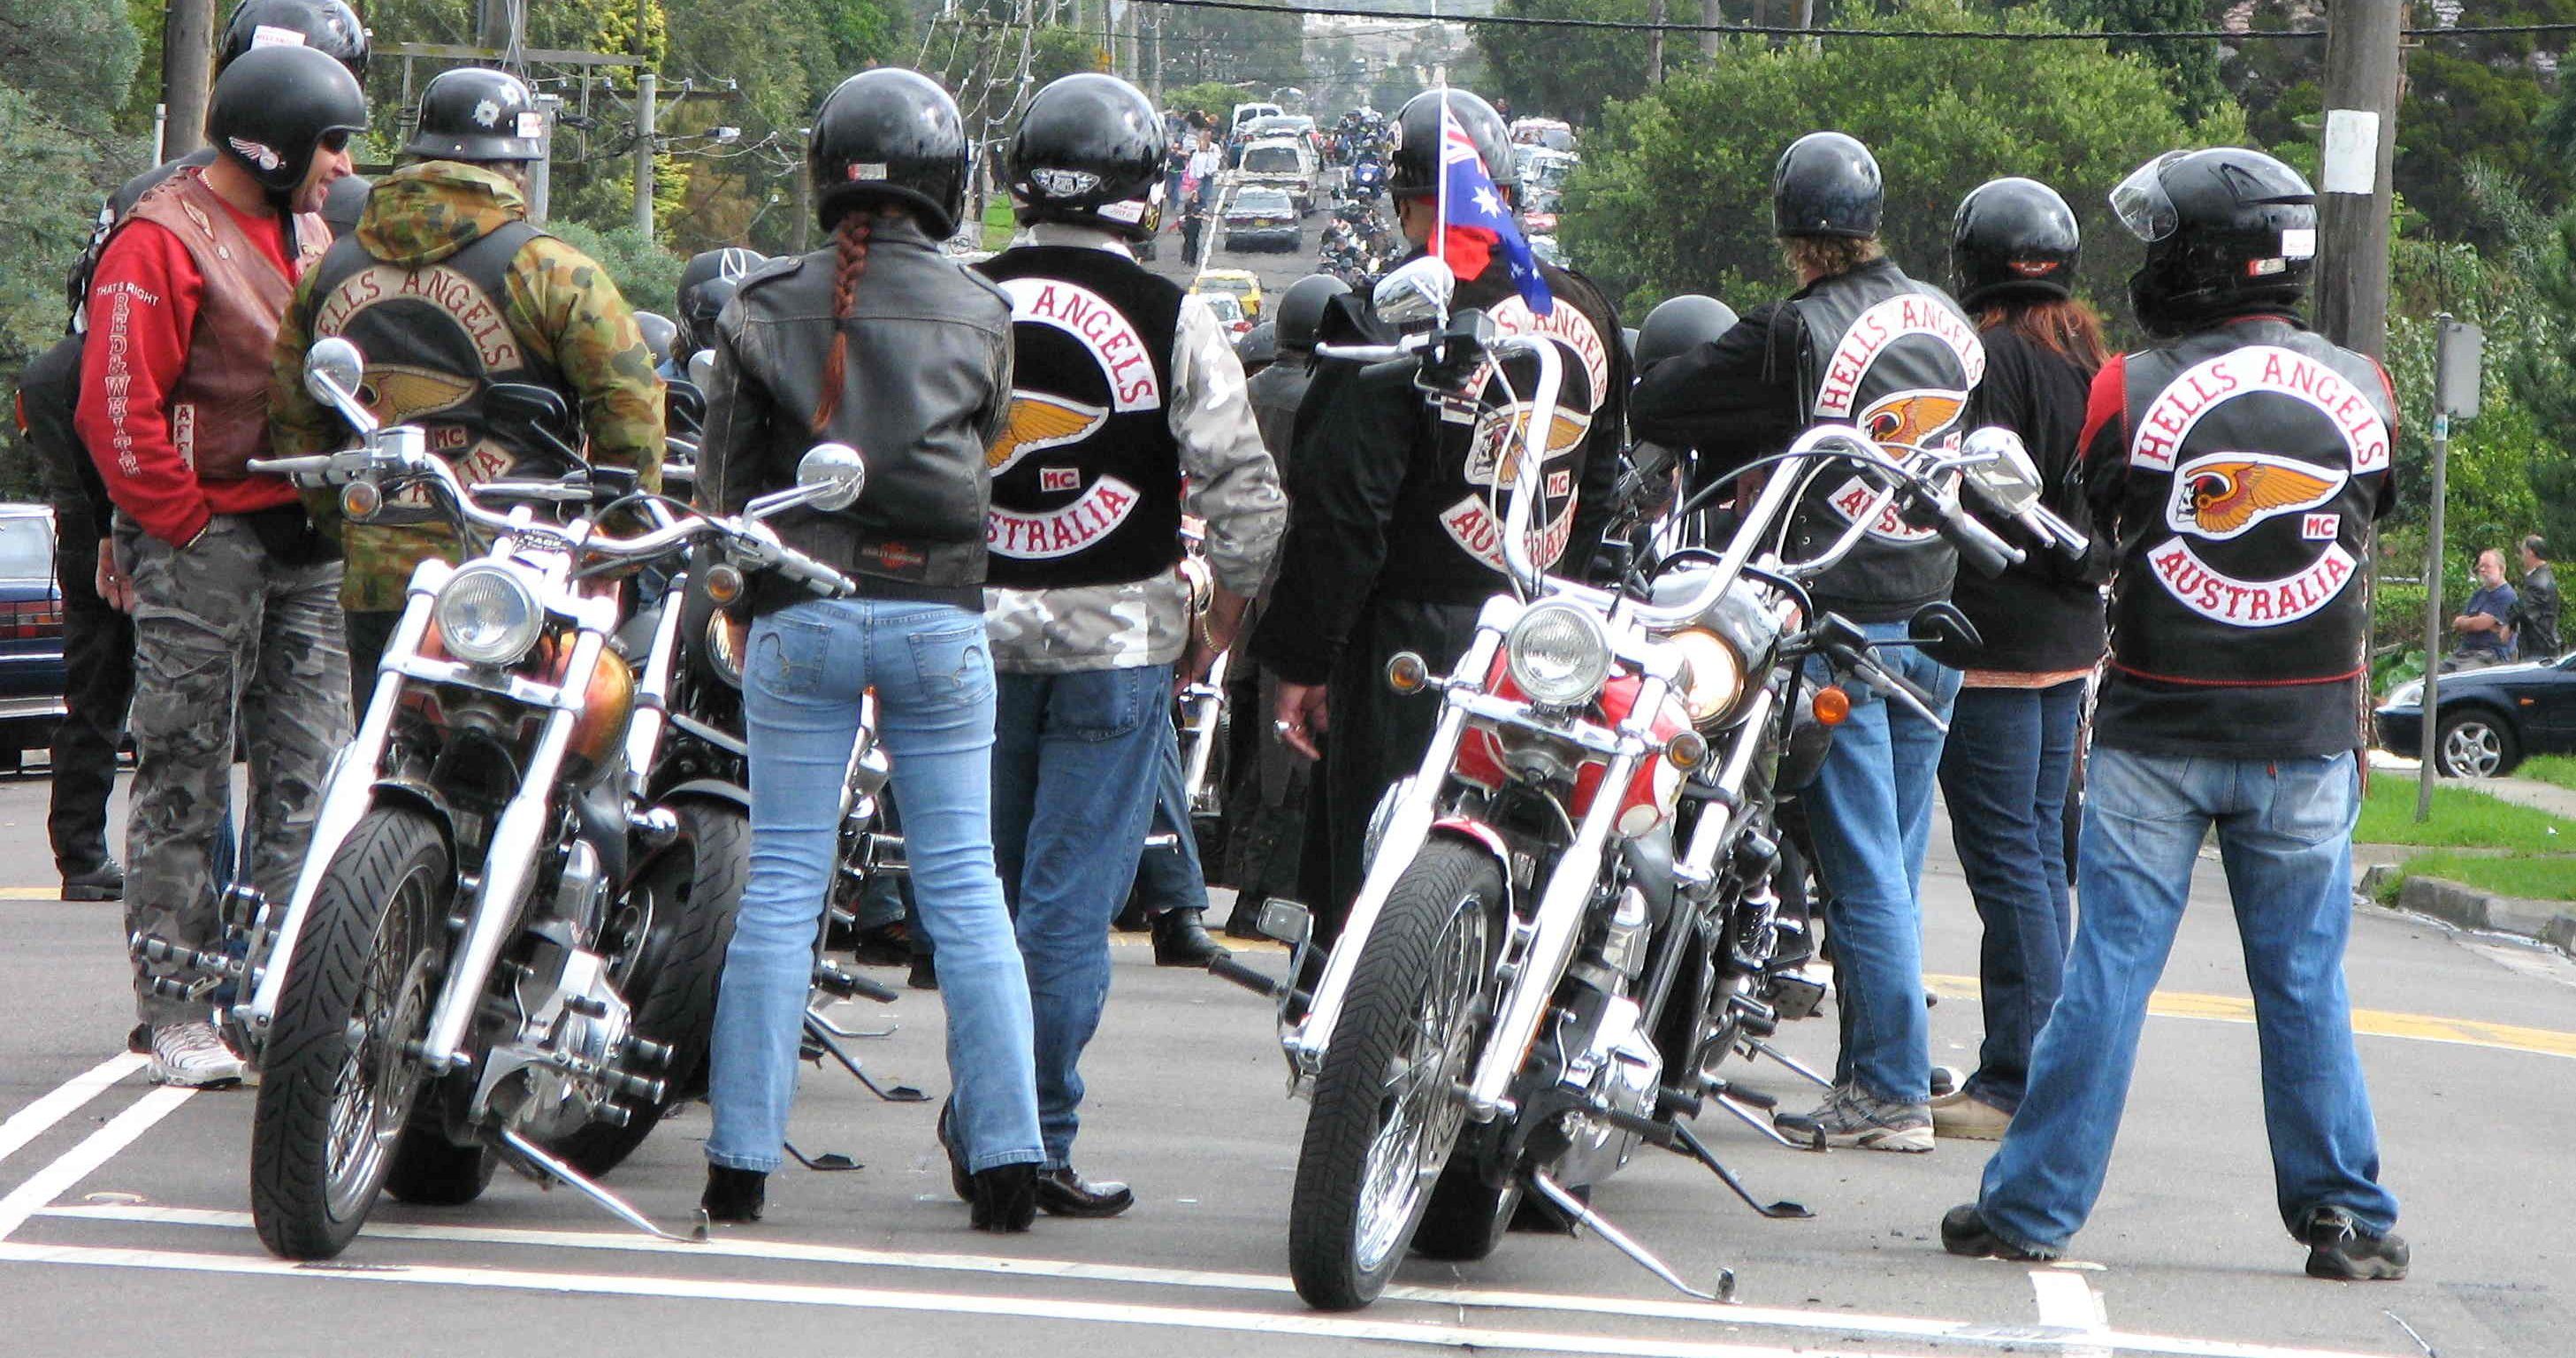 The Filthy Few: 10 facts about the Hells Angels Motorcycle Club